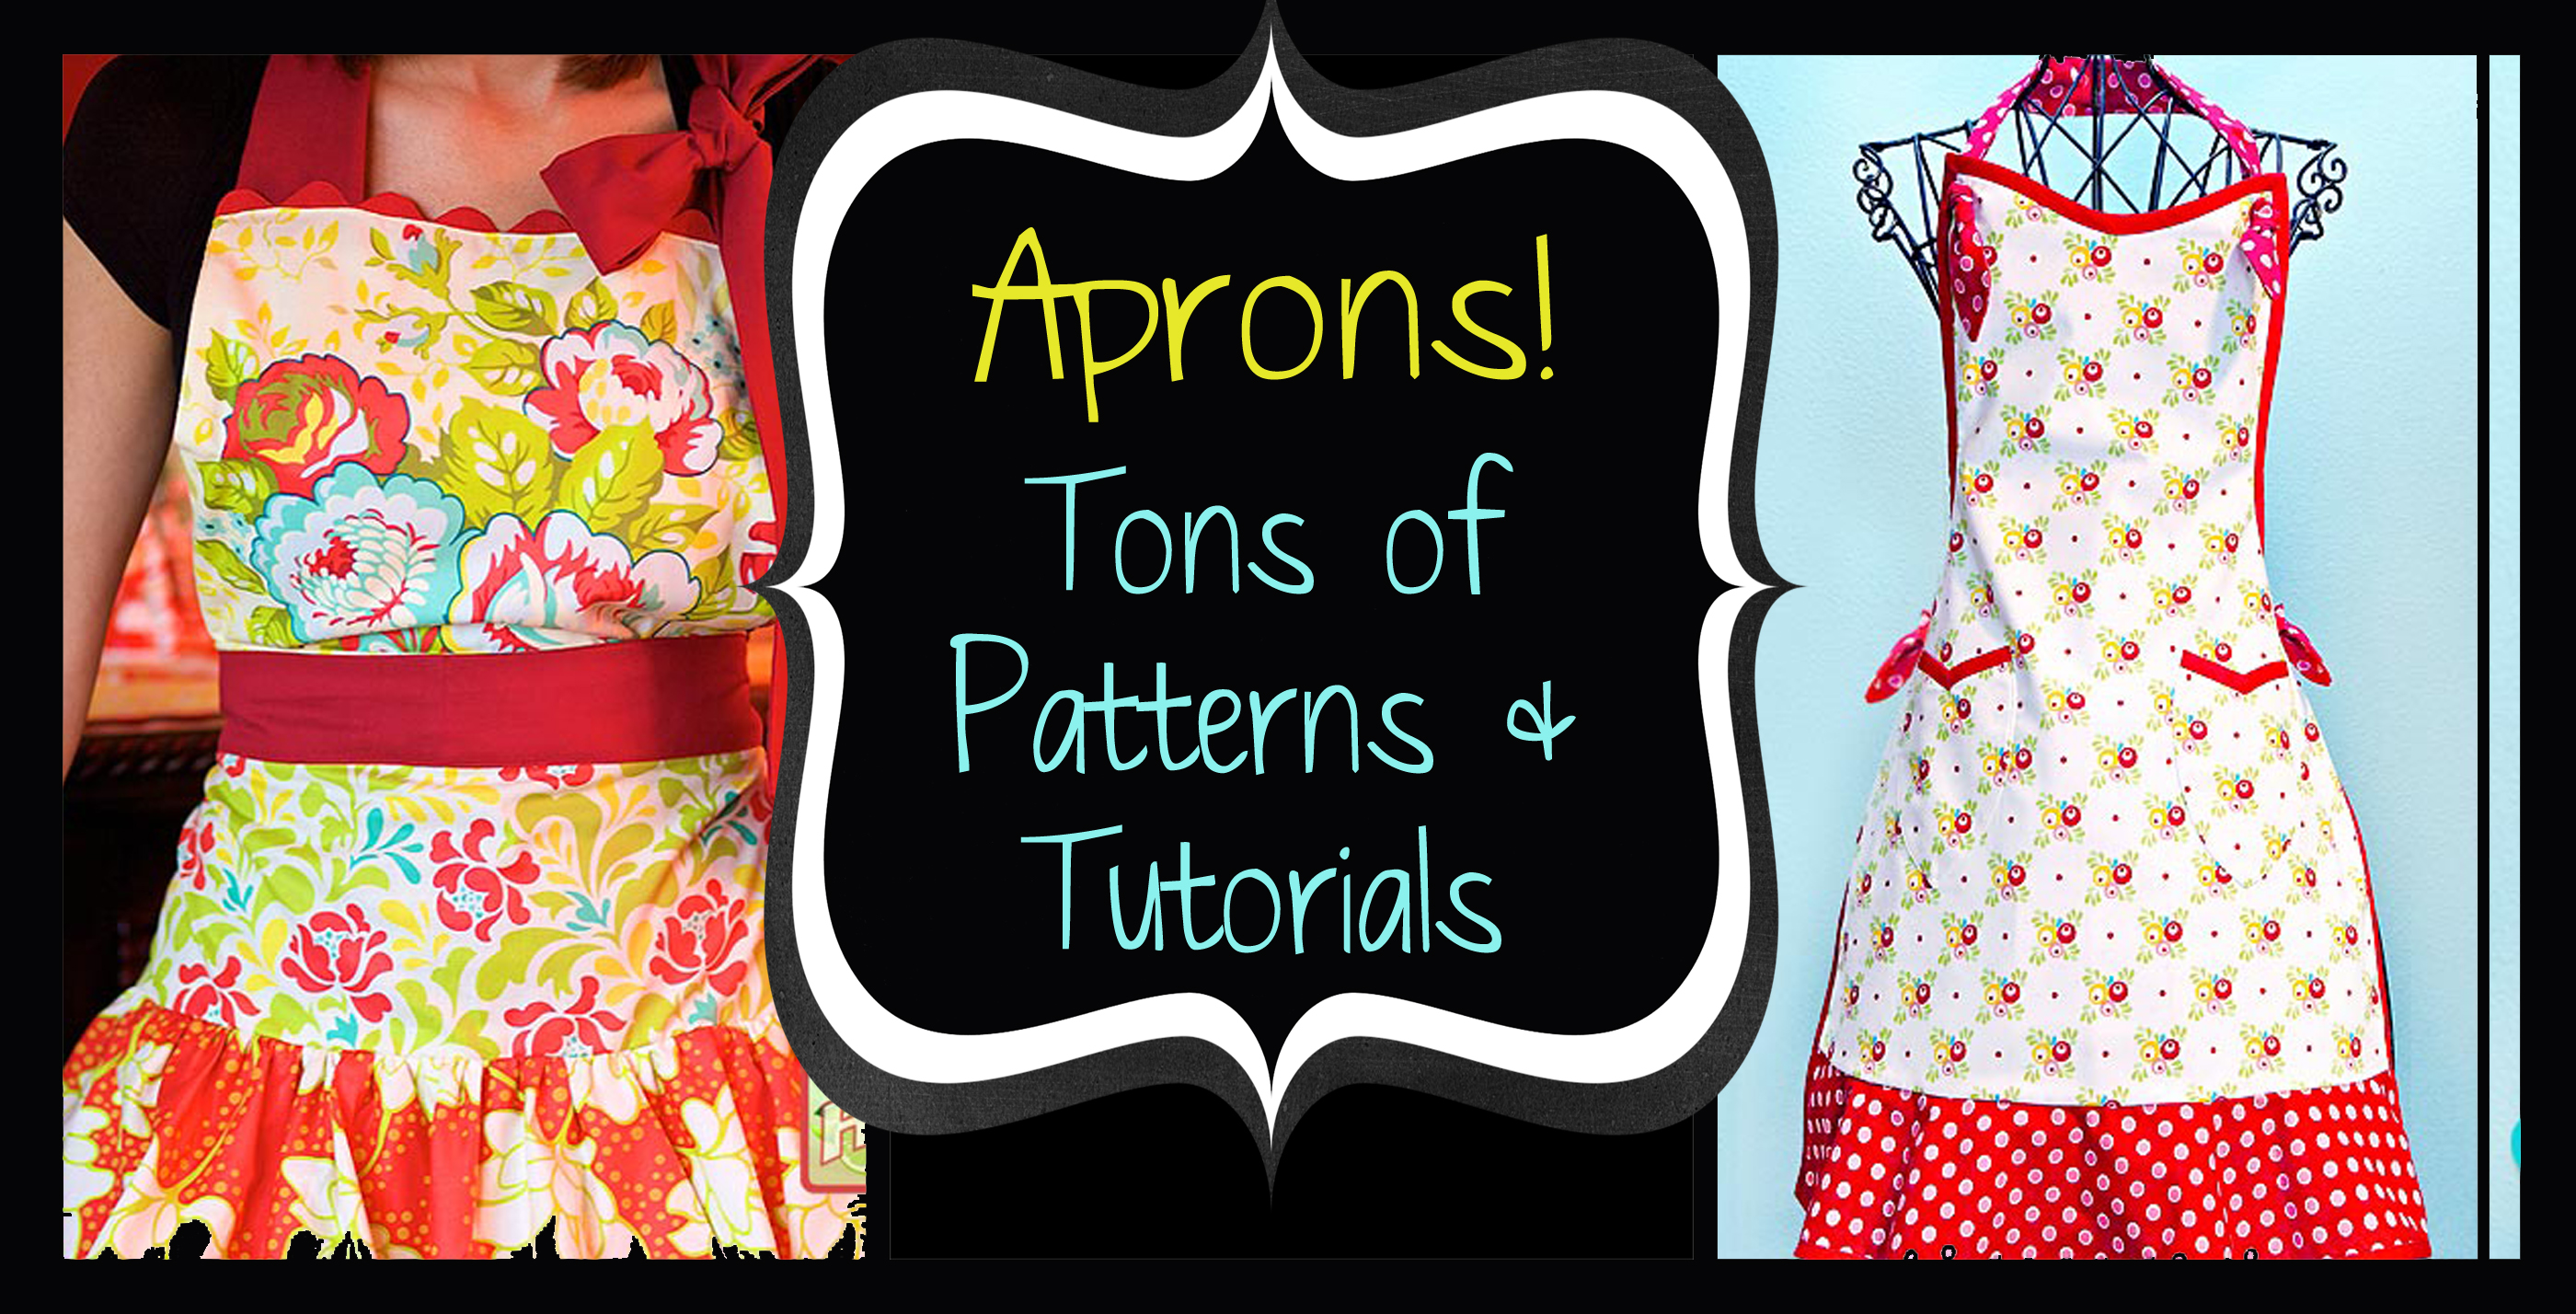 Aprons Aprons Aprons, My New Must Have, Must Be Chic While Baking